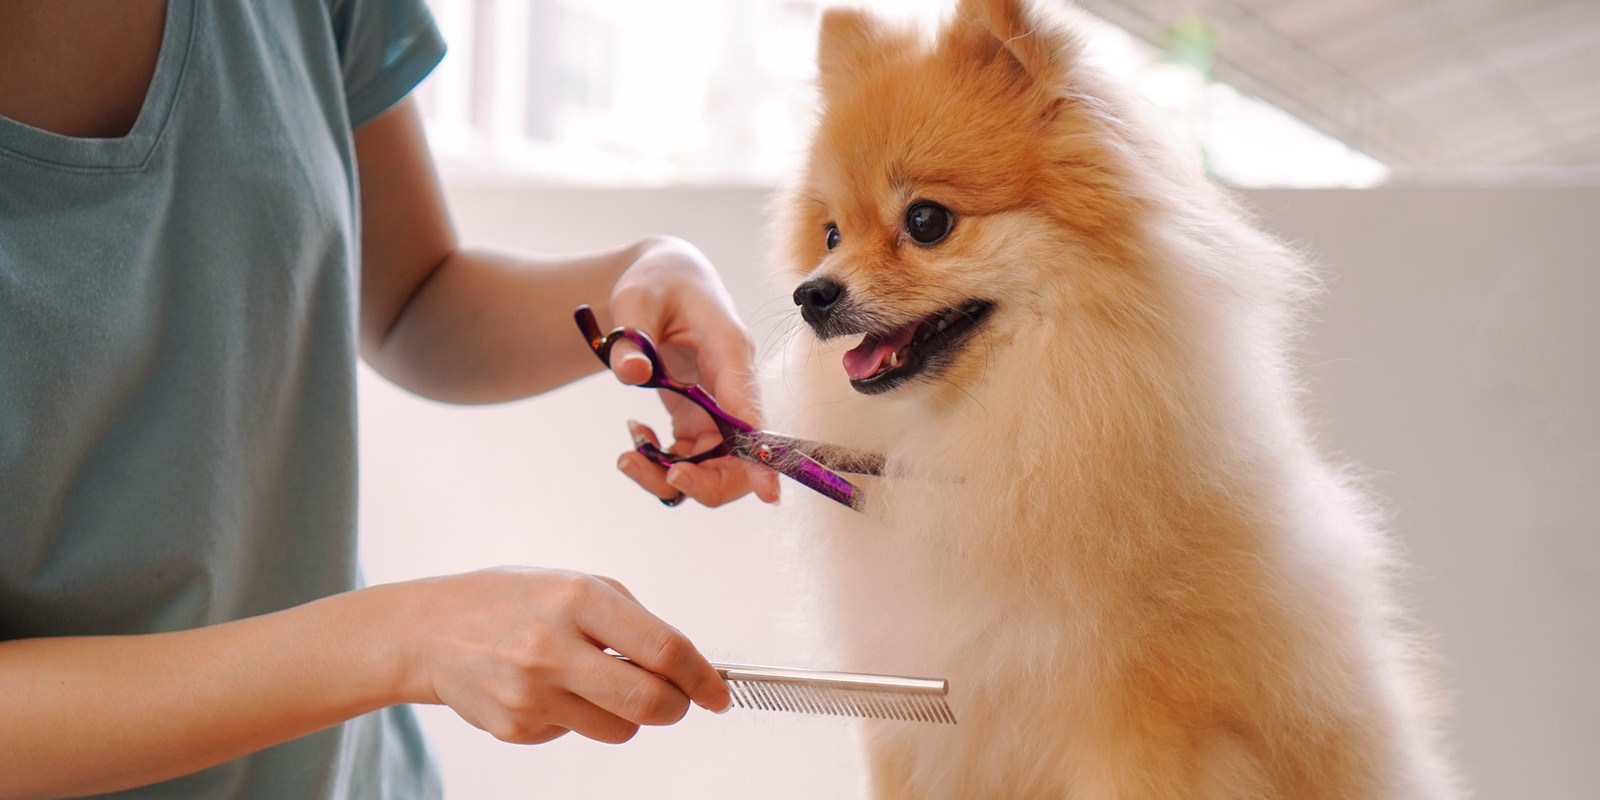 An image of a dog groomer, grooming the dog